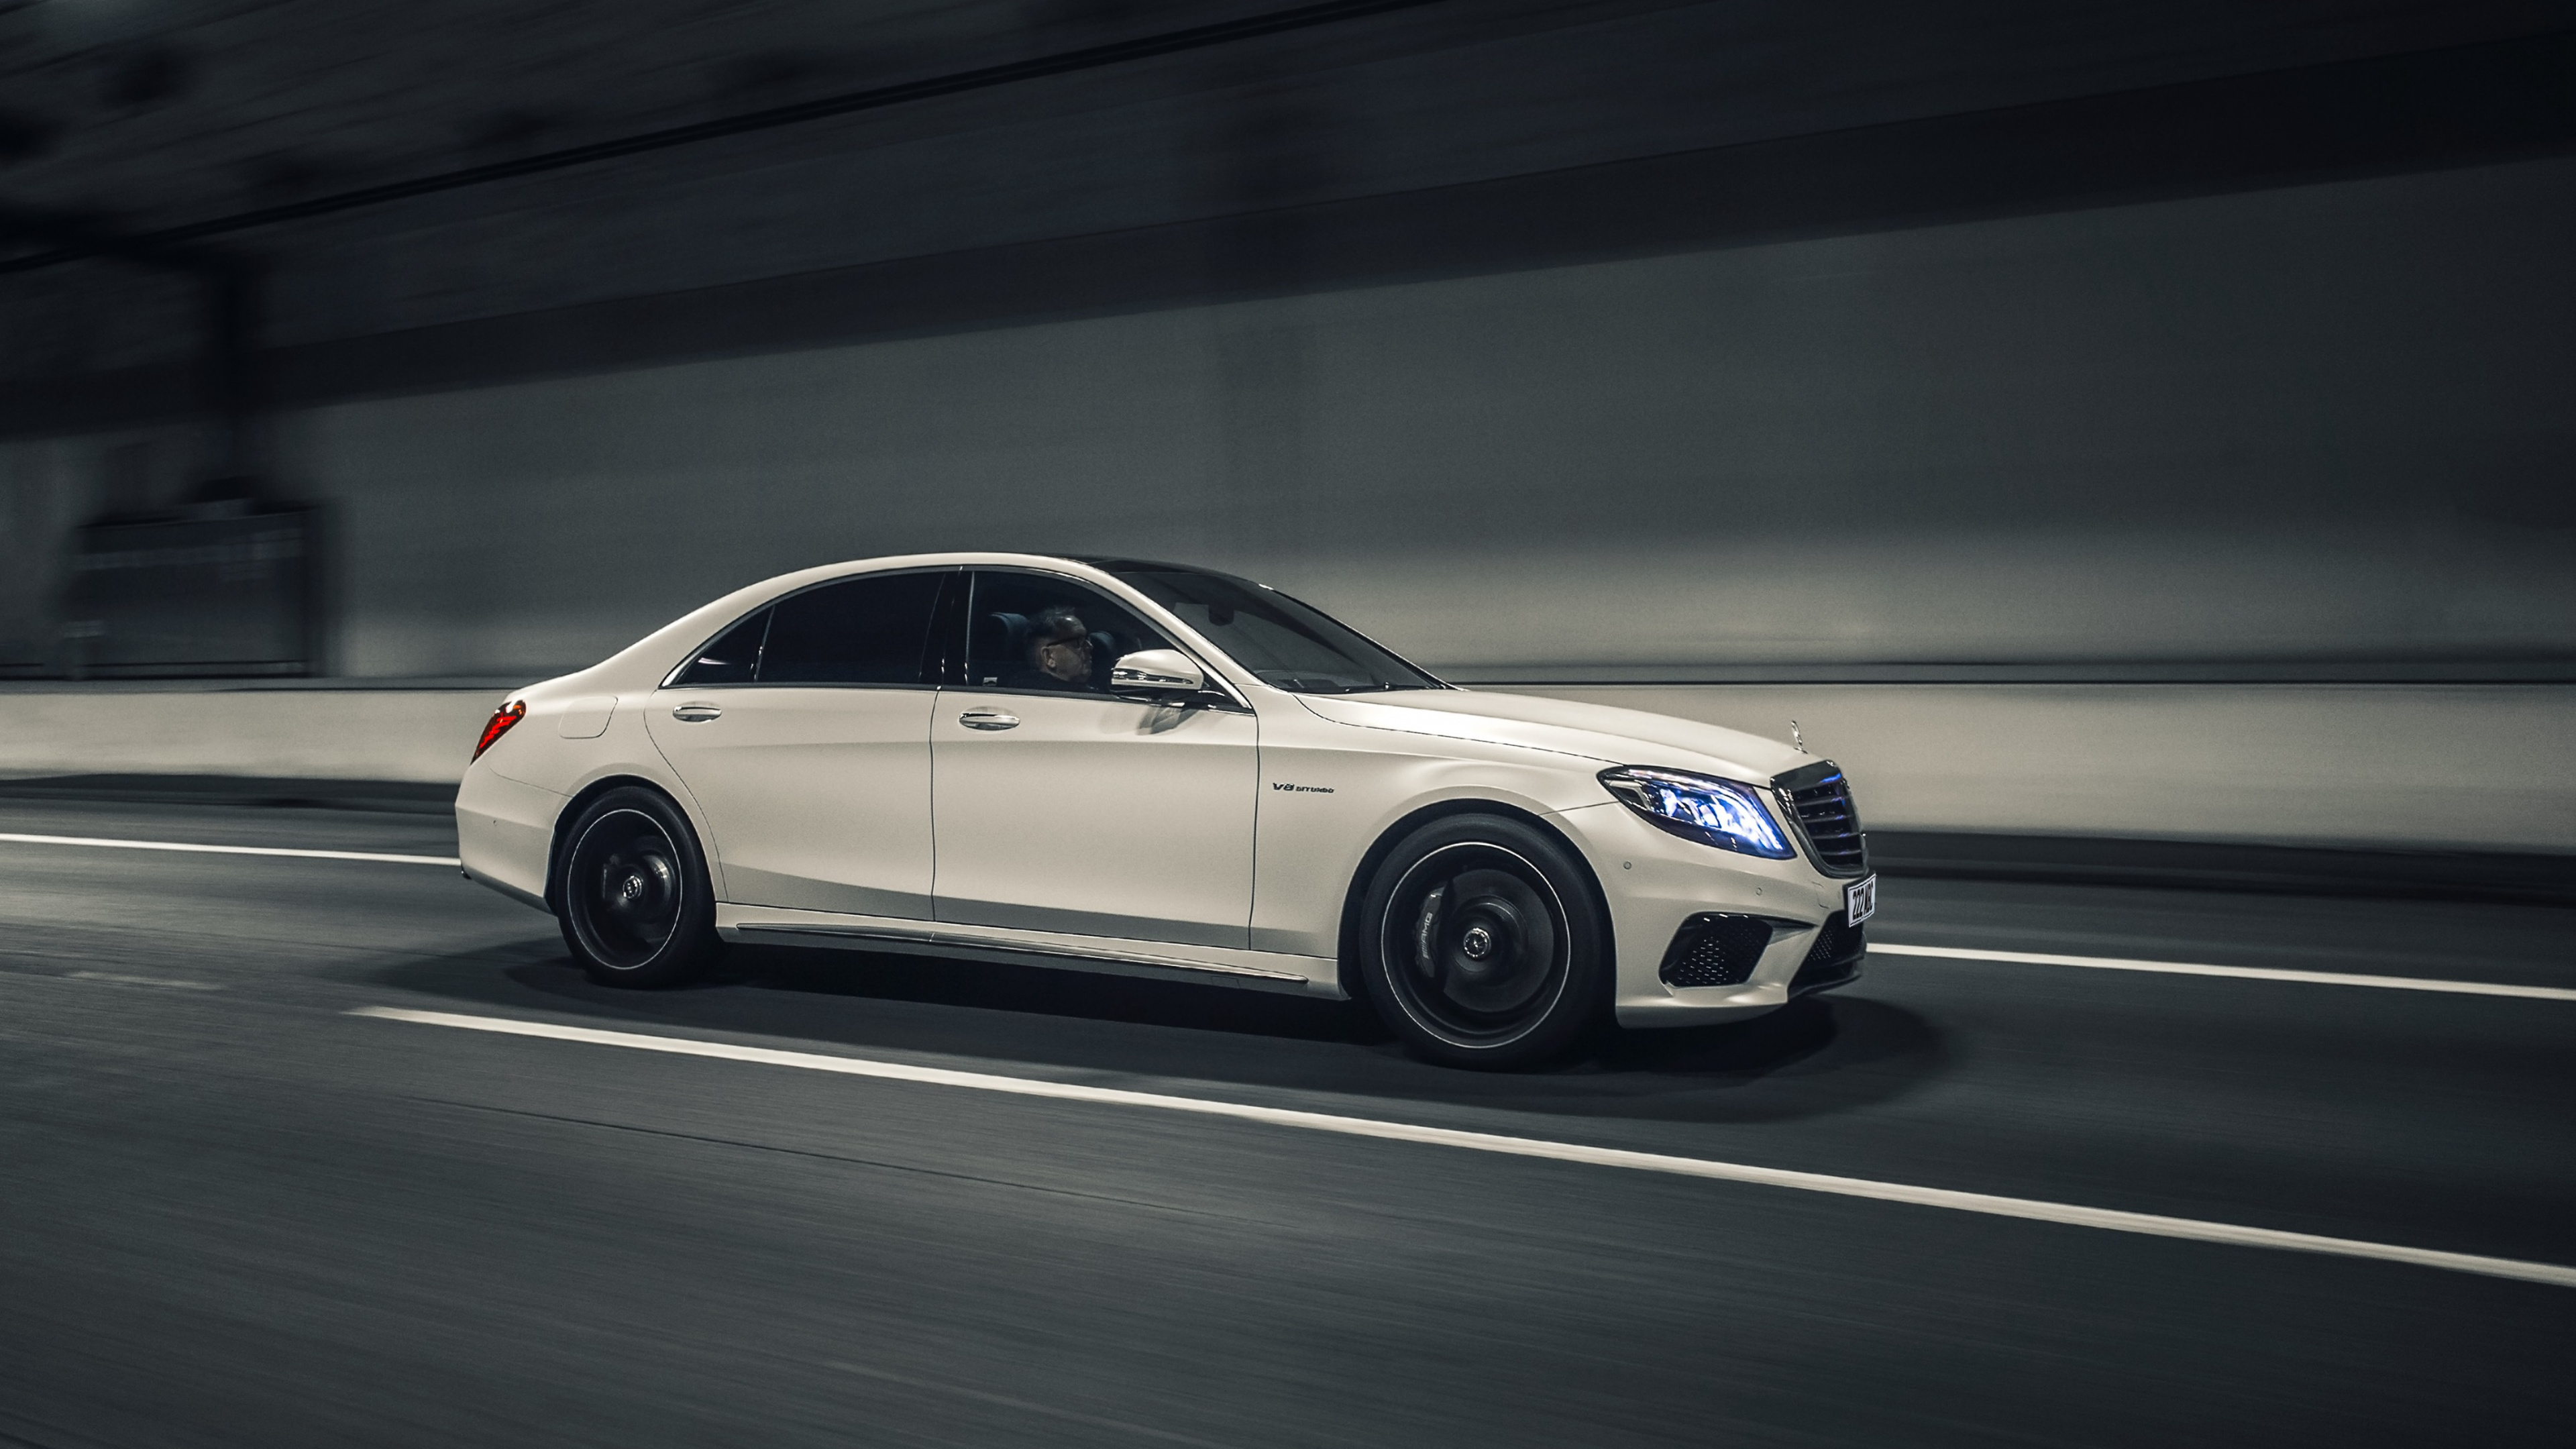 White Mercedes Benz Coupe on Road. Wallpaper in 3840x2160 Resolution